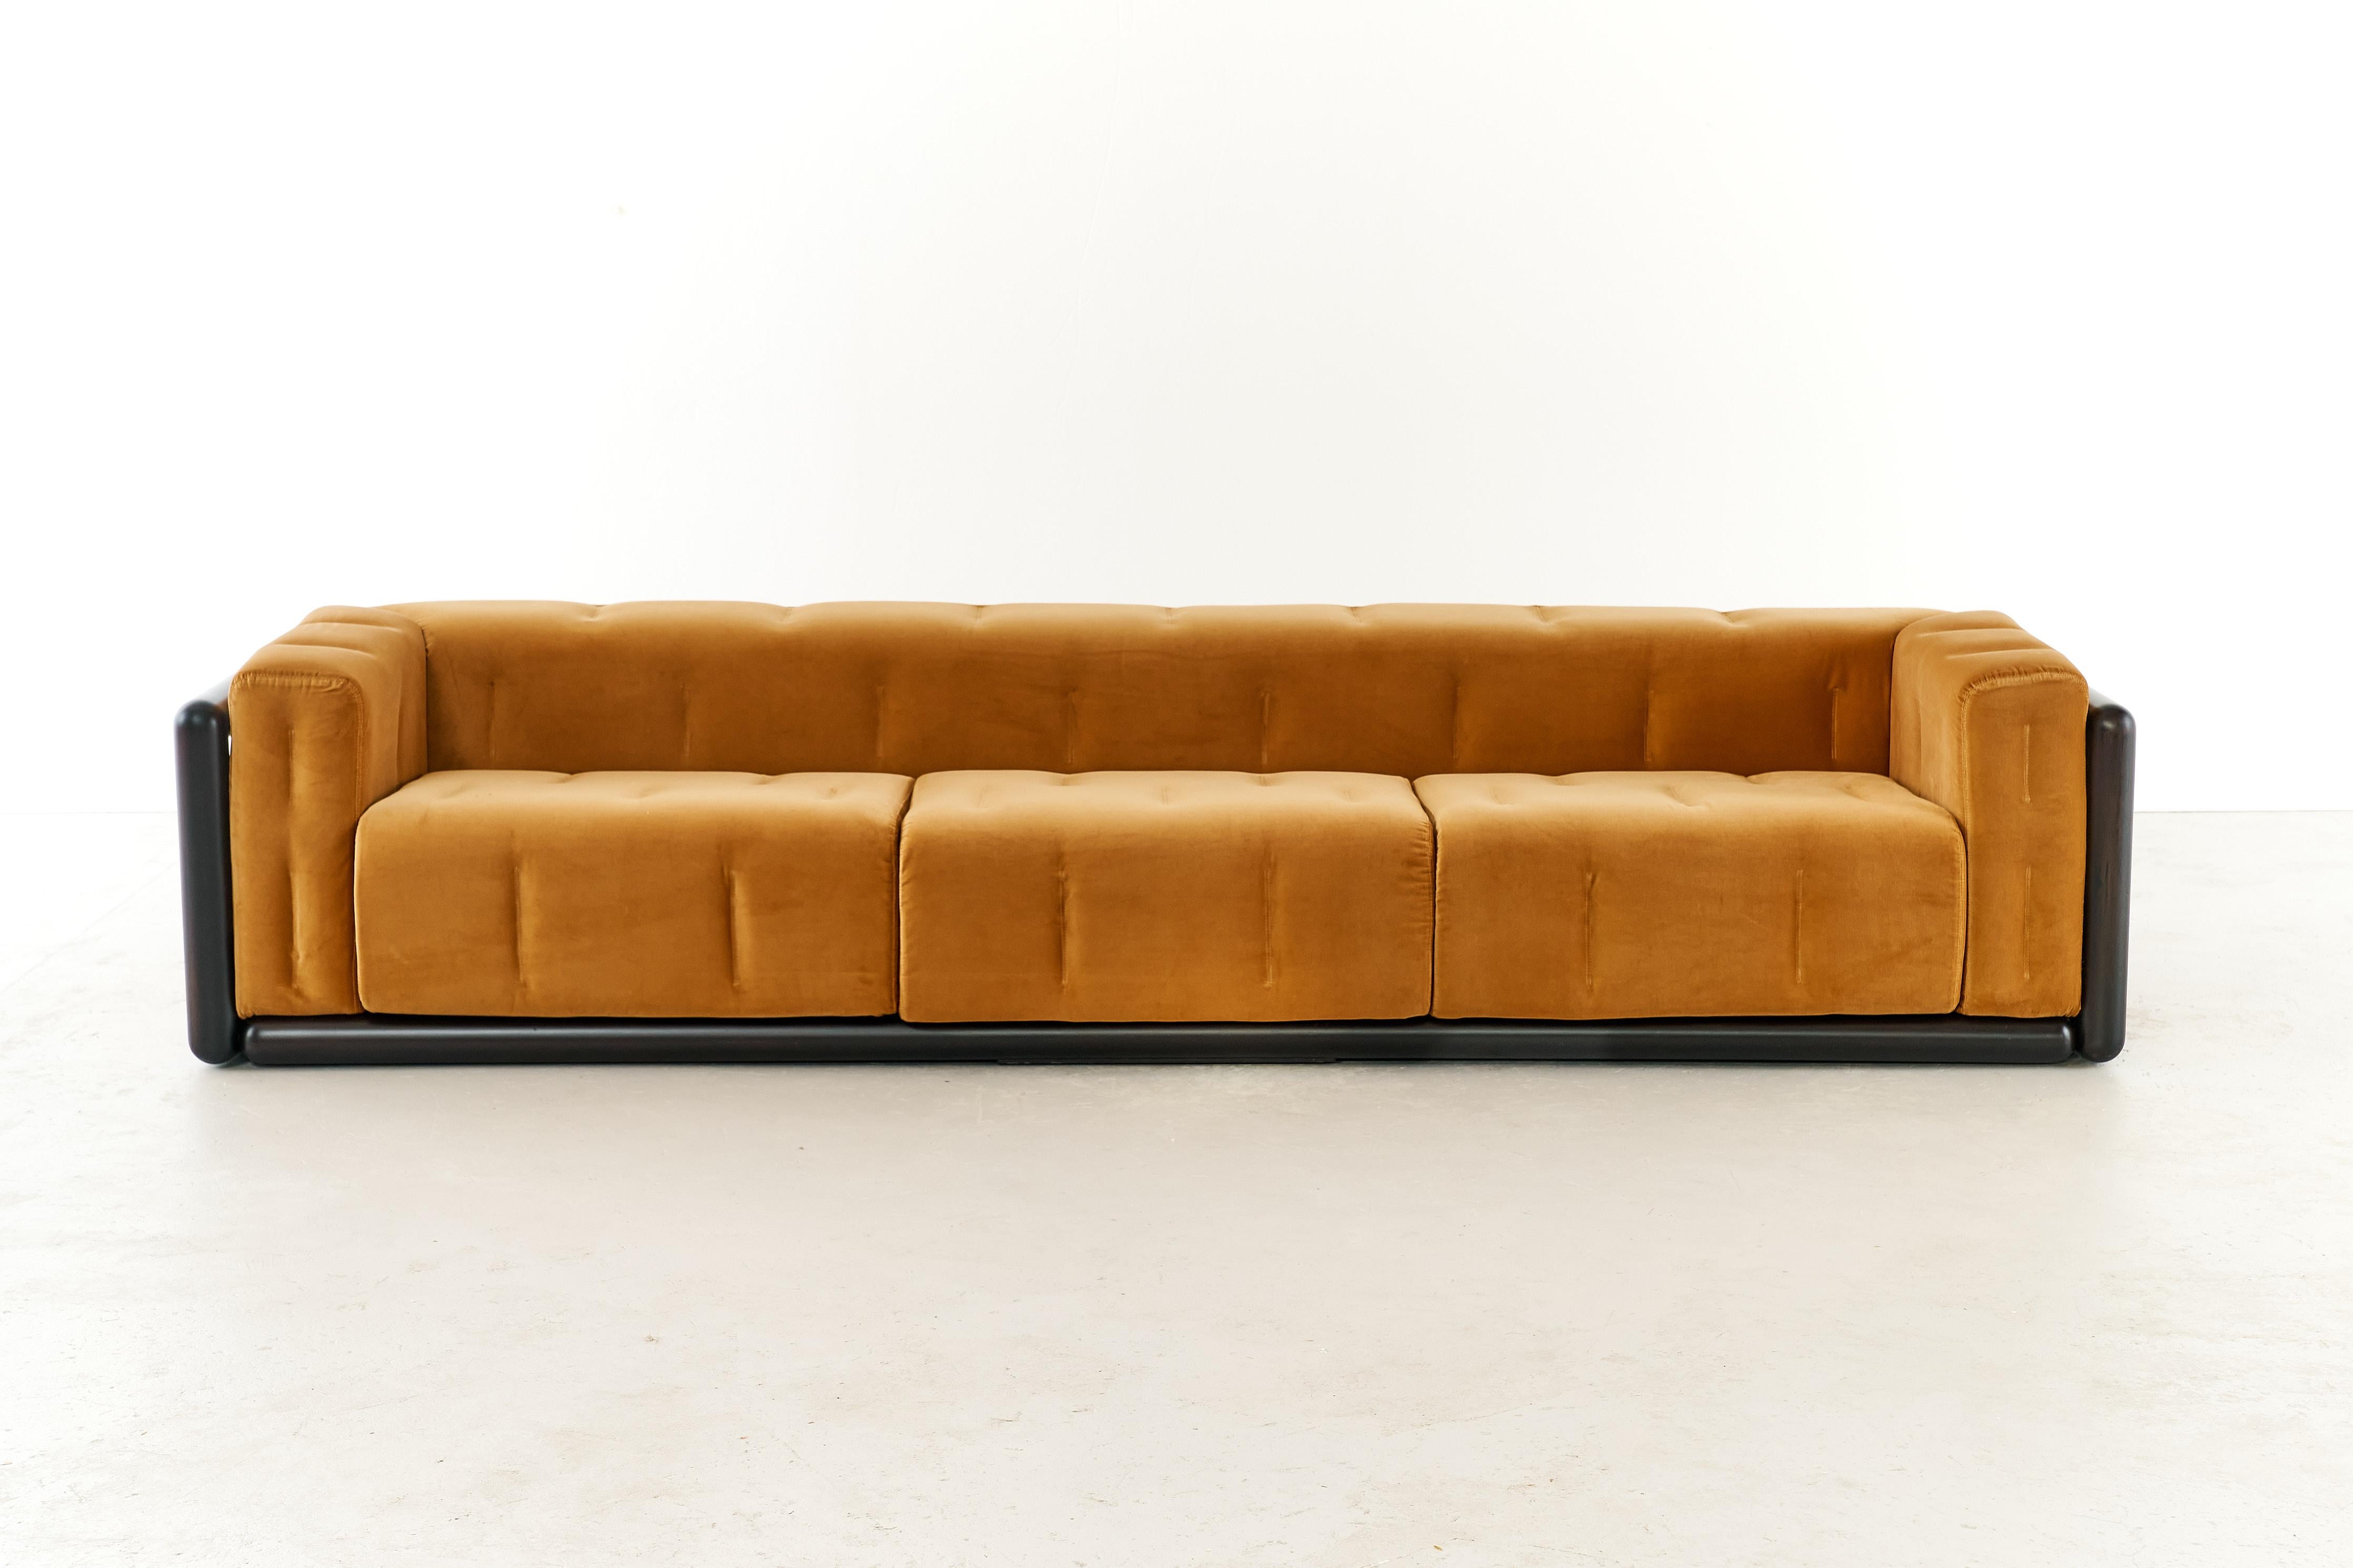 The Cornaro sofa, designed by Carlo Scarpa in 1973 and produced by Simon, is a remarkable piece of furniture known for its unique style and excellent craftsmanship. Scarpa's vision blended tradition with innovation, creating a timeless piece that